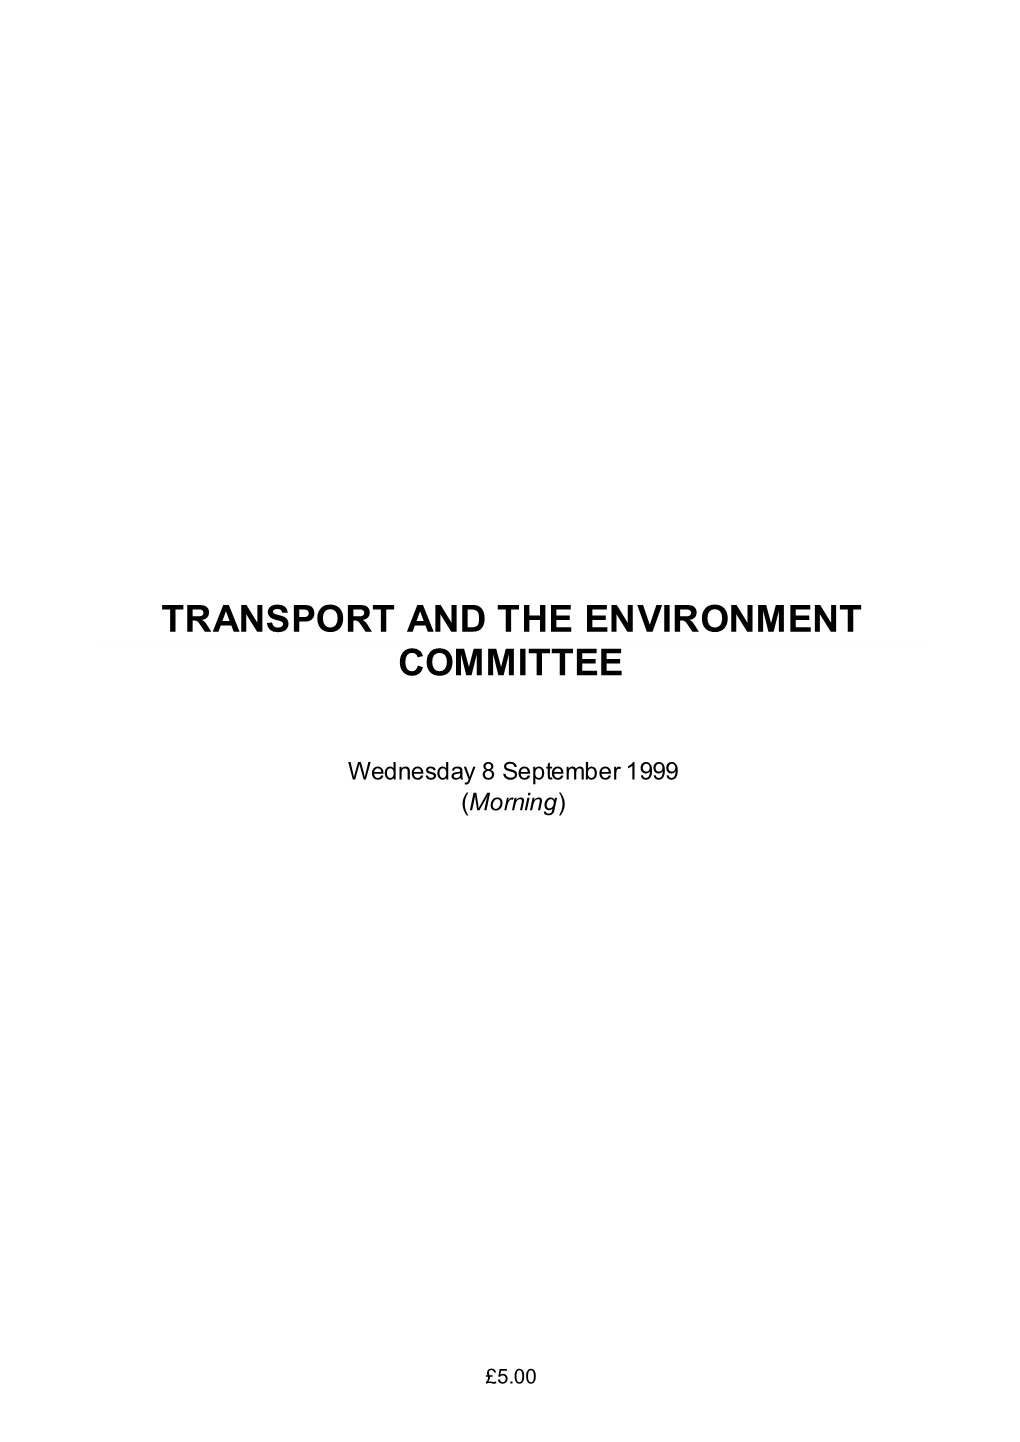 Transport and the Environment Committee